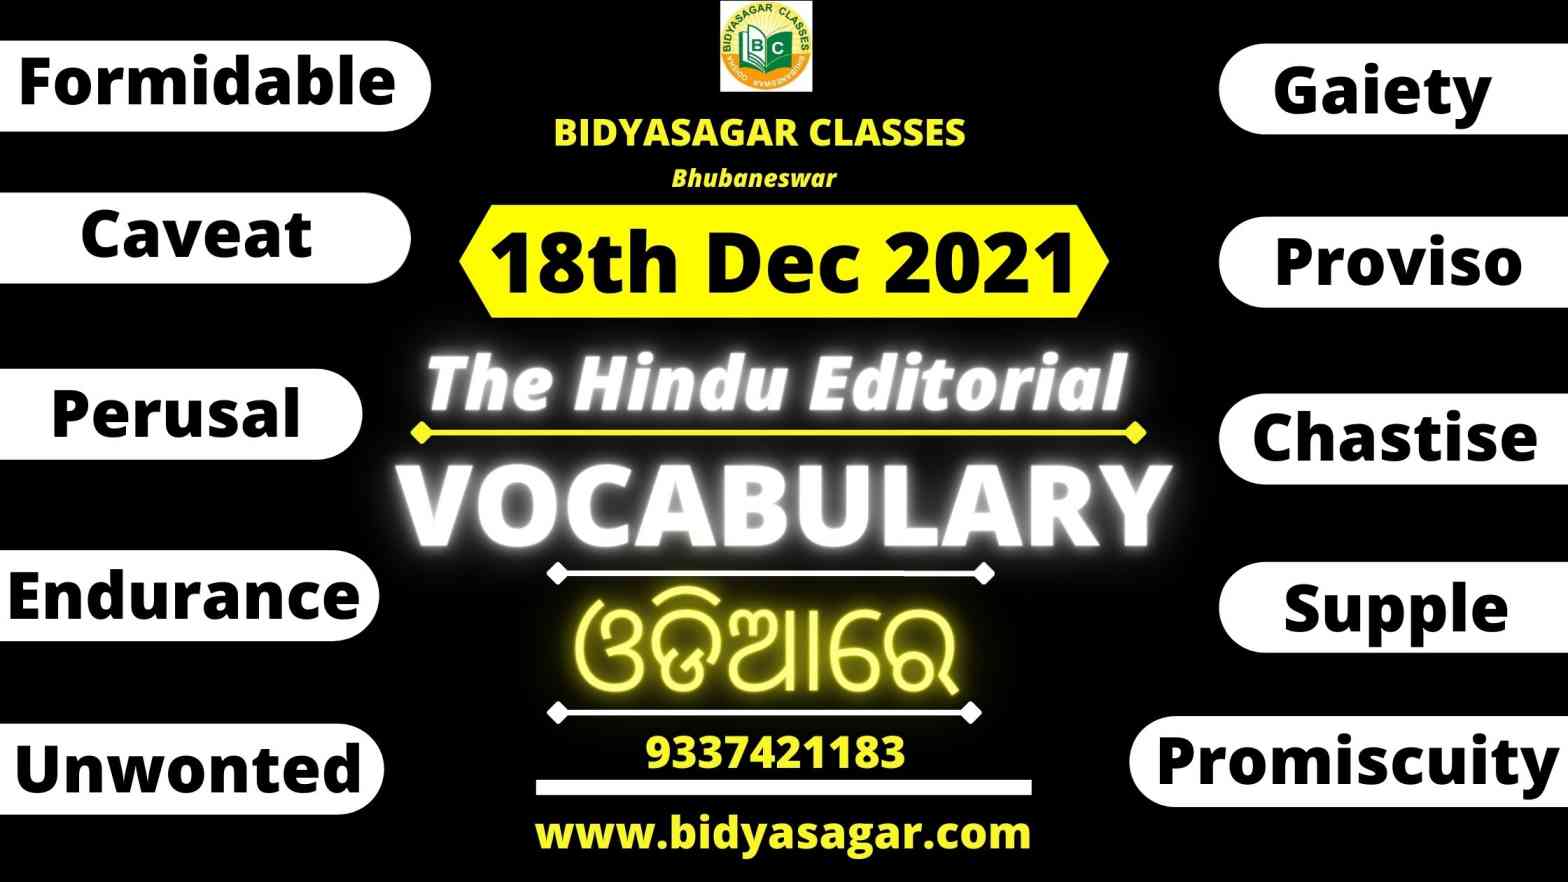 The Hindu Editorial Vocabulary of 18th December 2021